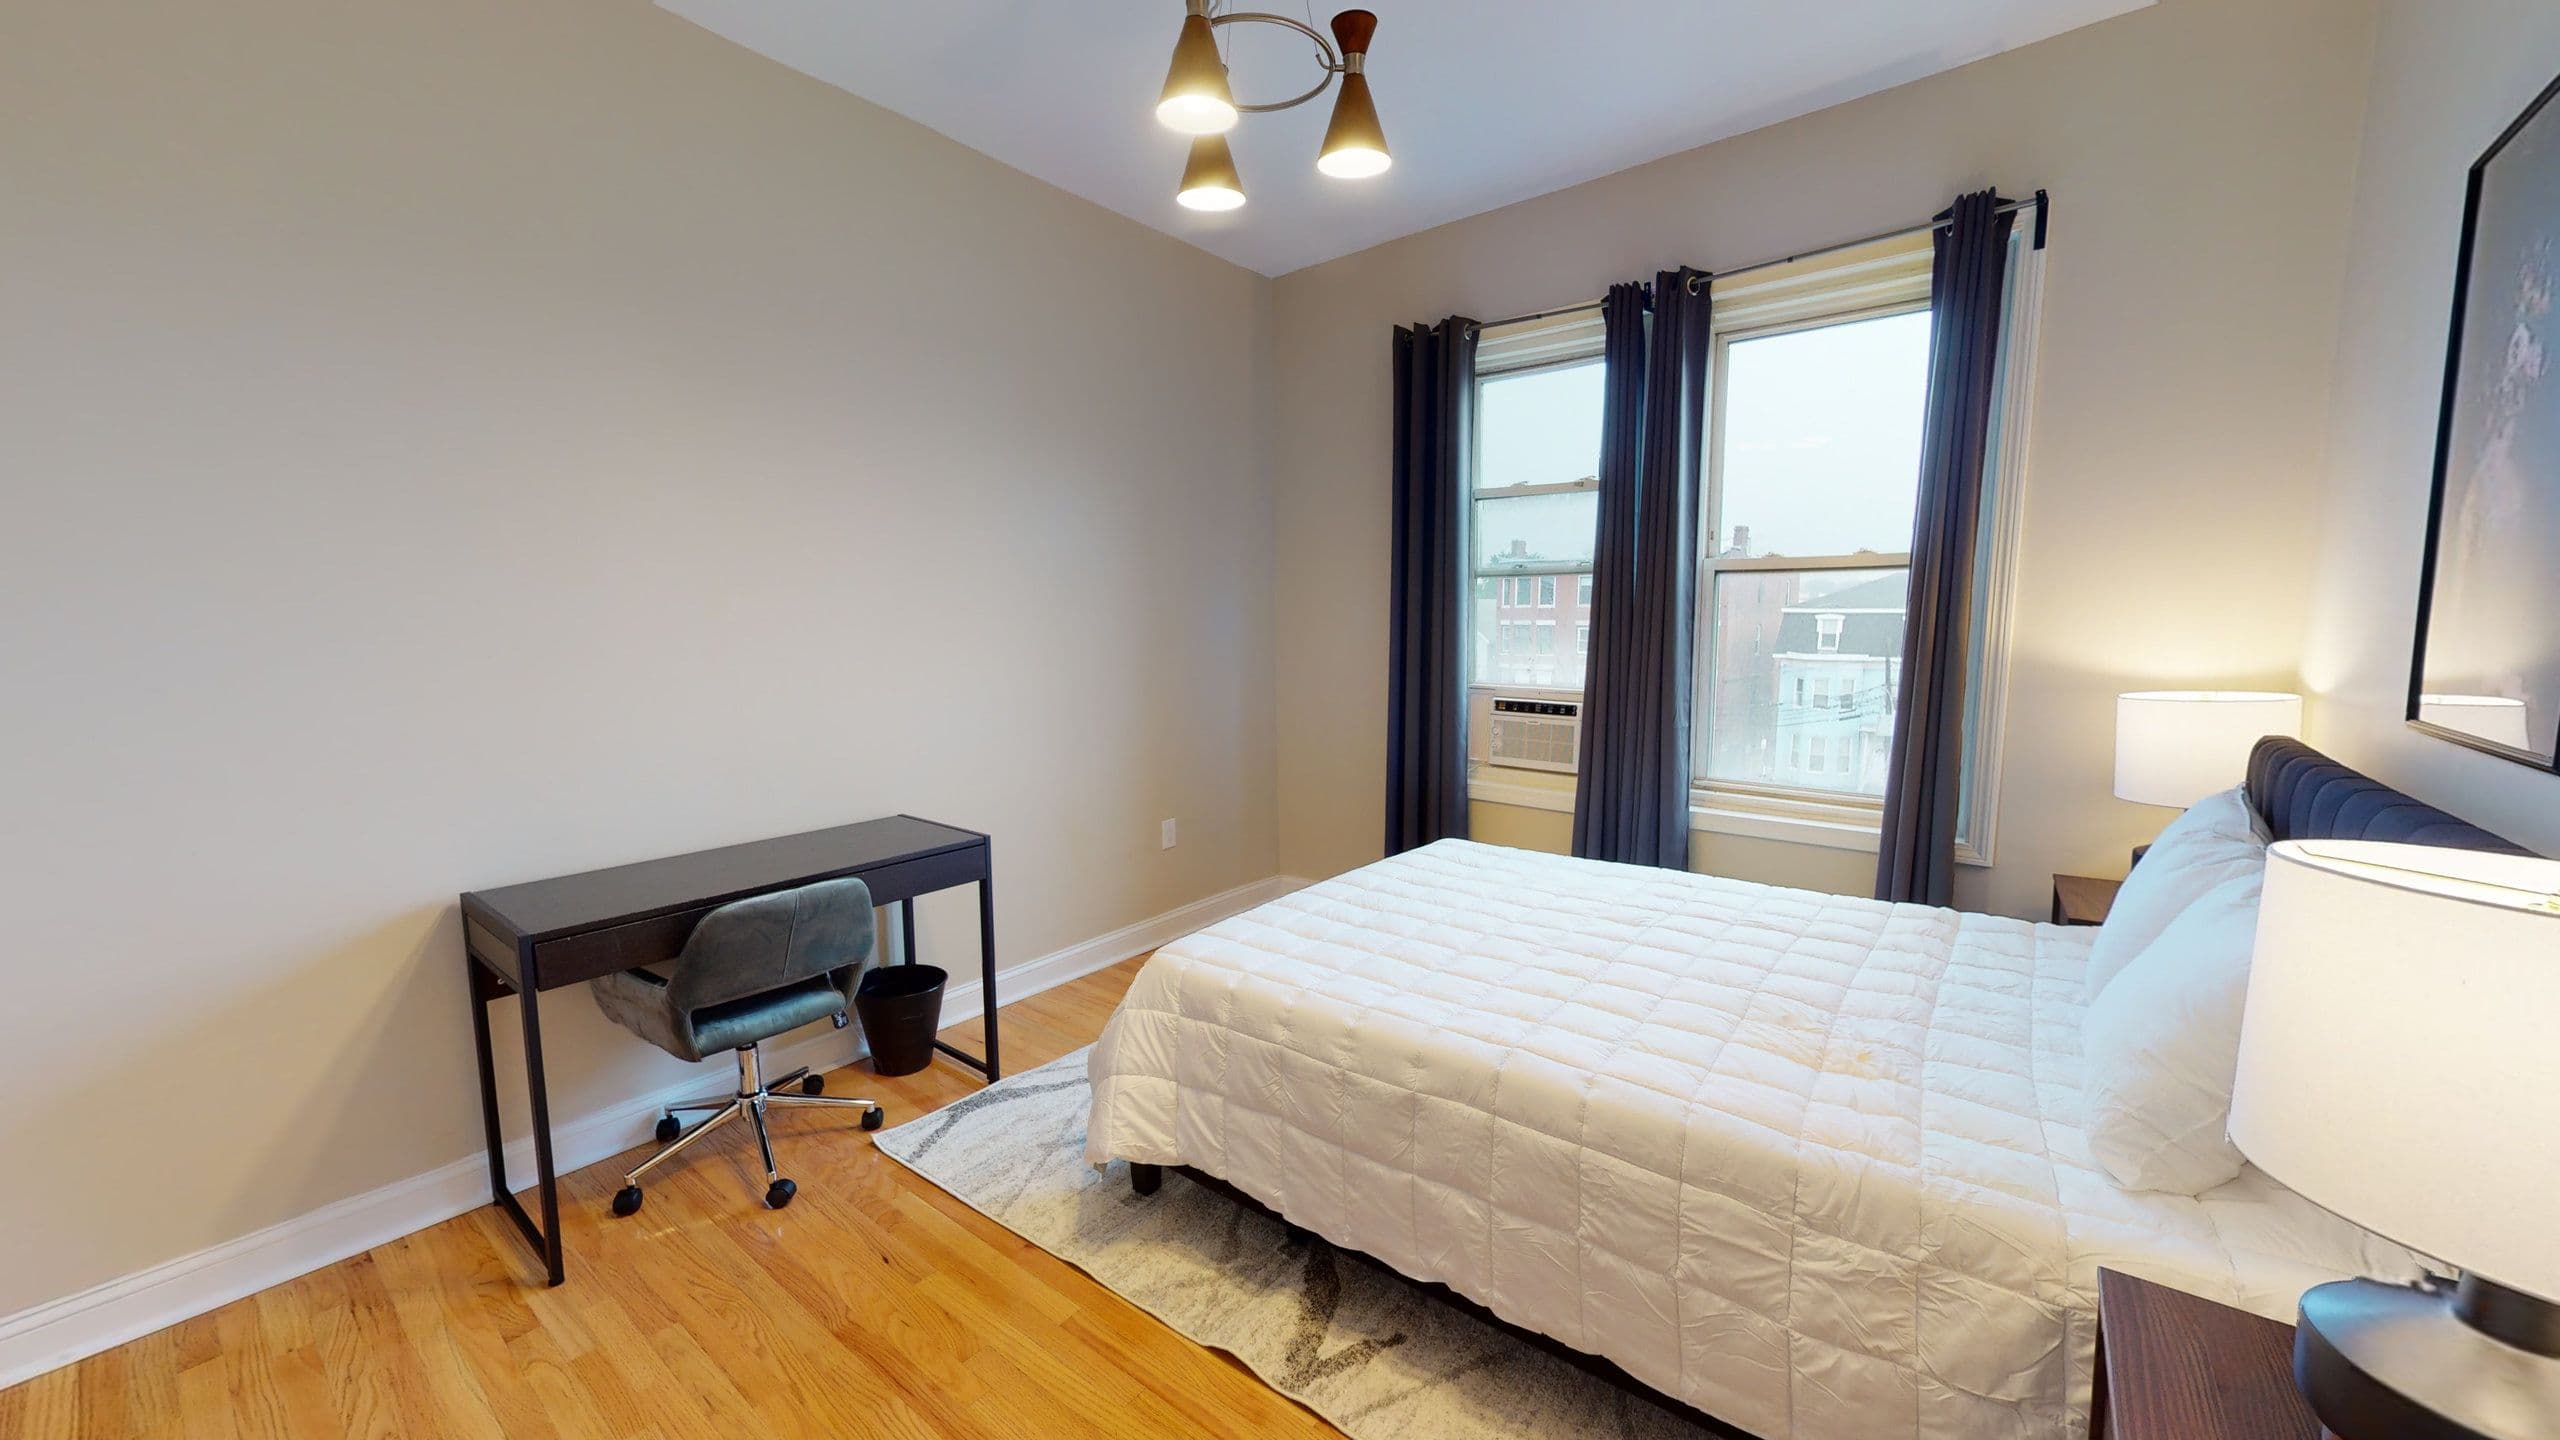 Photo 23 of #1159: Queen Bedroom A at June Homes